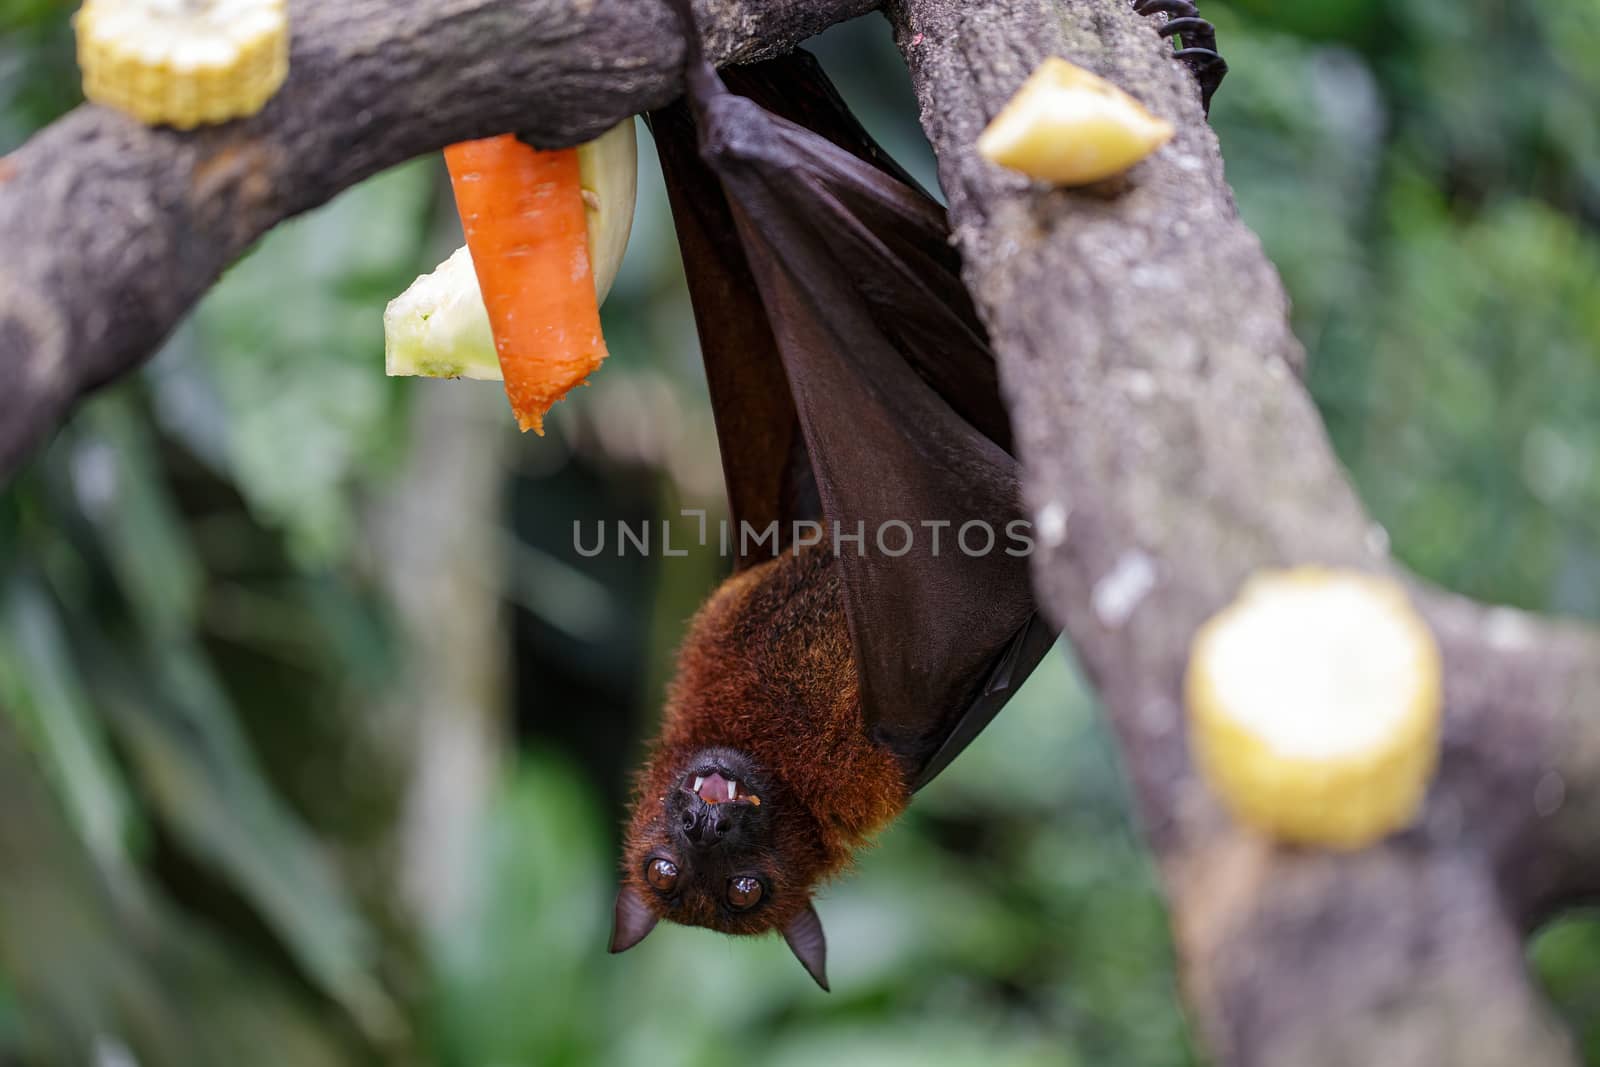 Big brown bat hanging on a tree eating fruits and vegetables. Concept of animal care, travel and wildlife observation. Concept of urban wild animals. by dugulan